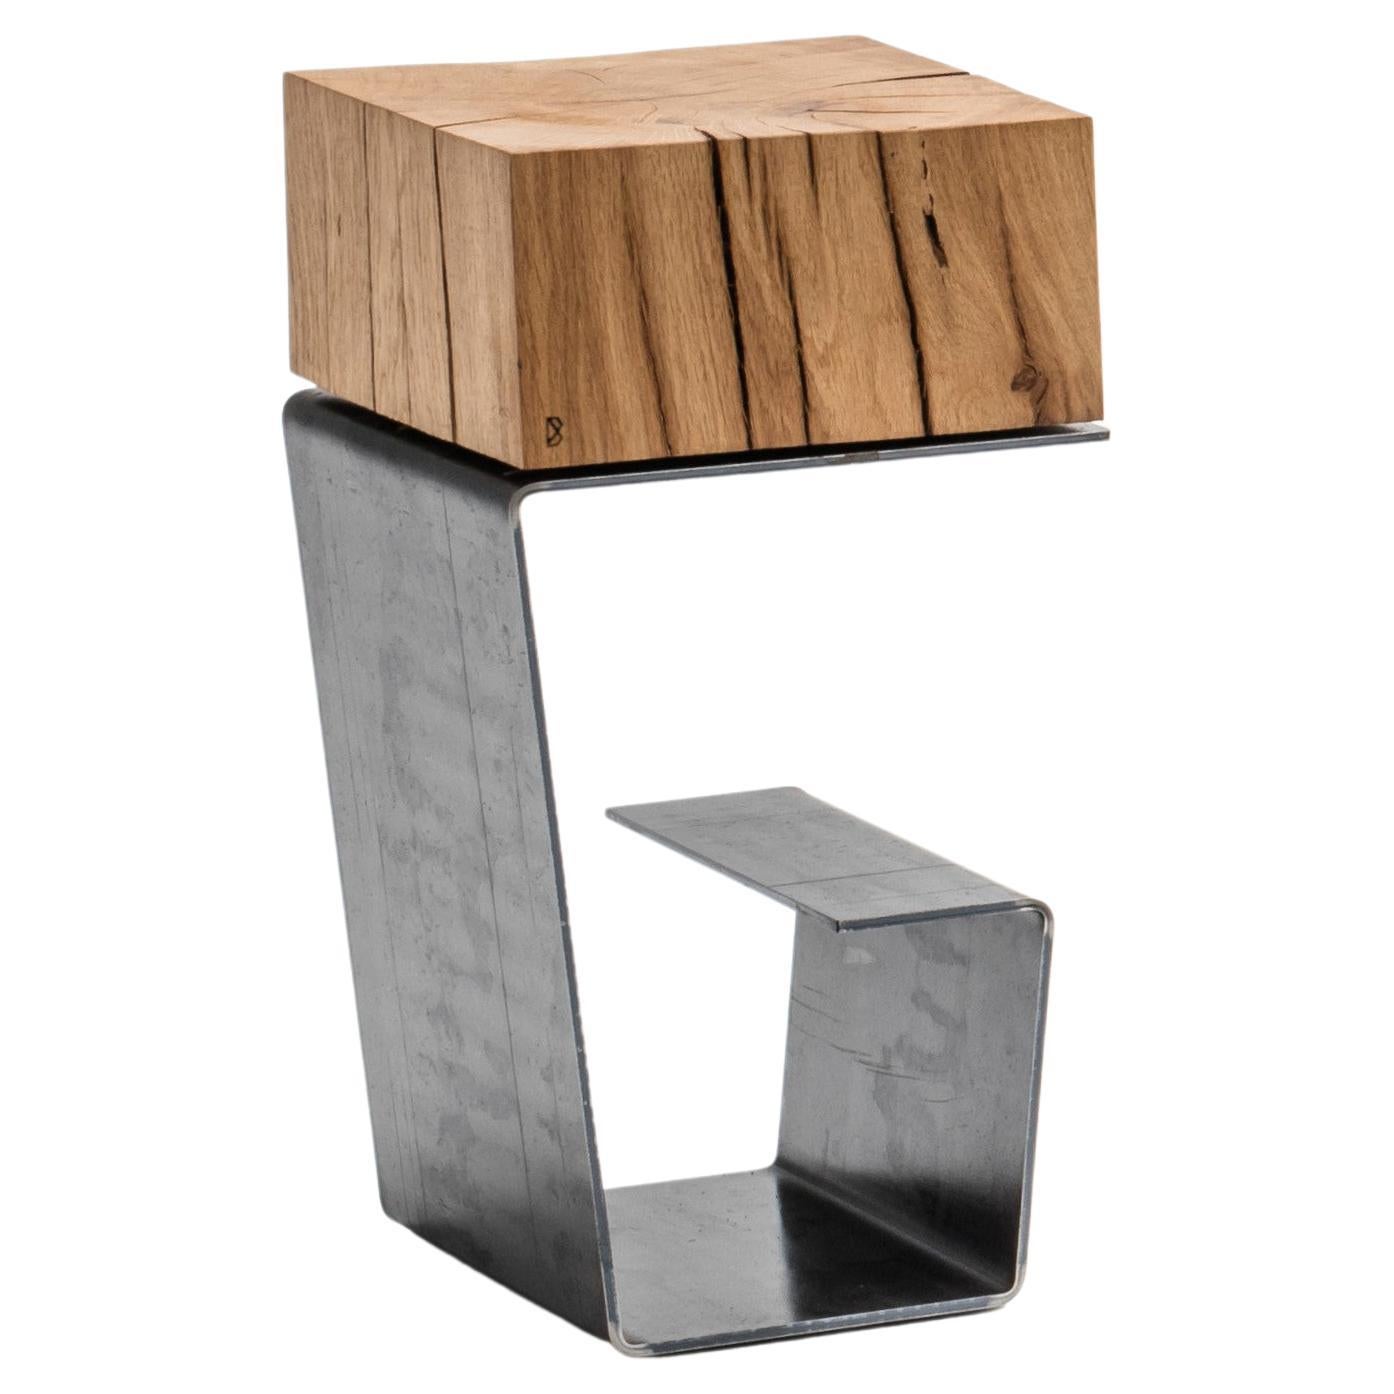 Contemporary Side Table by Tomasz Danielec, Raw Steel, Vintage Treated Oak